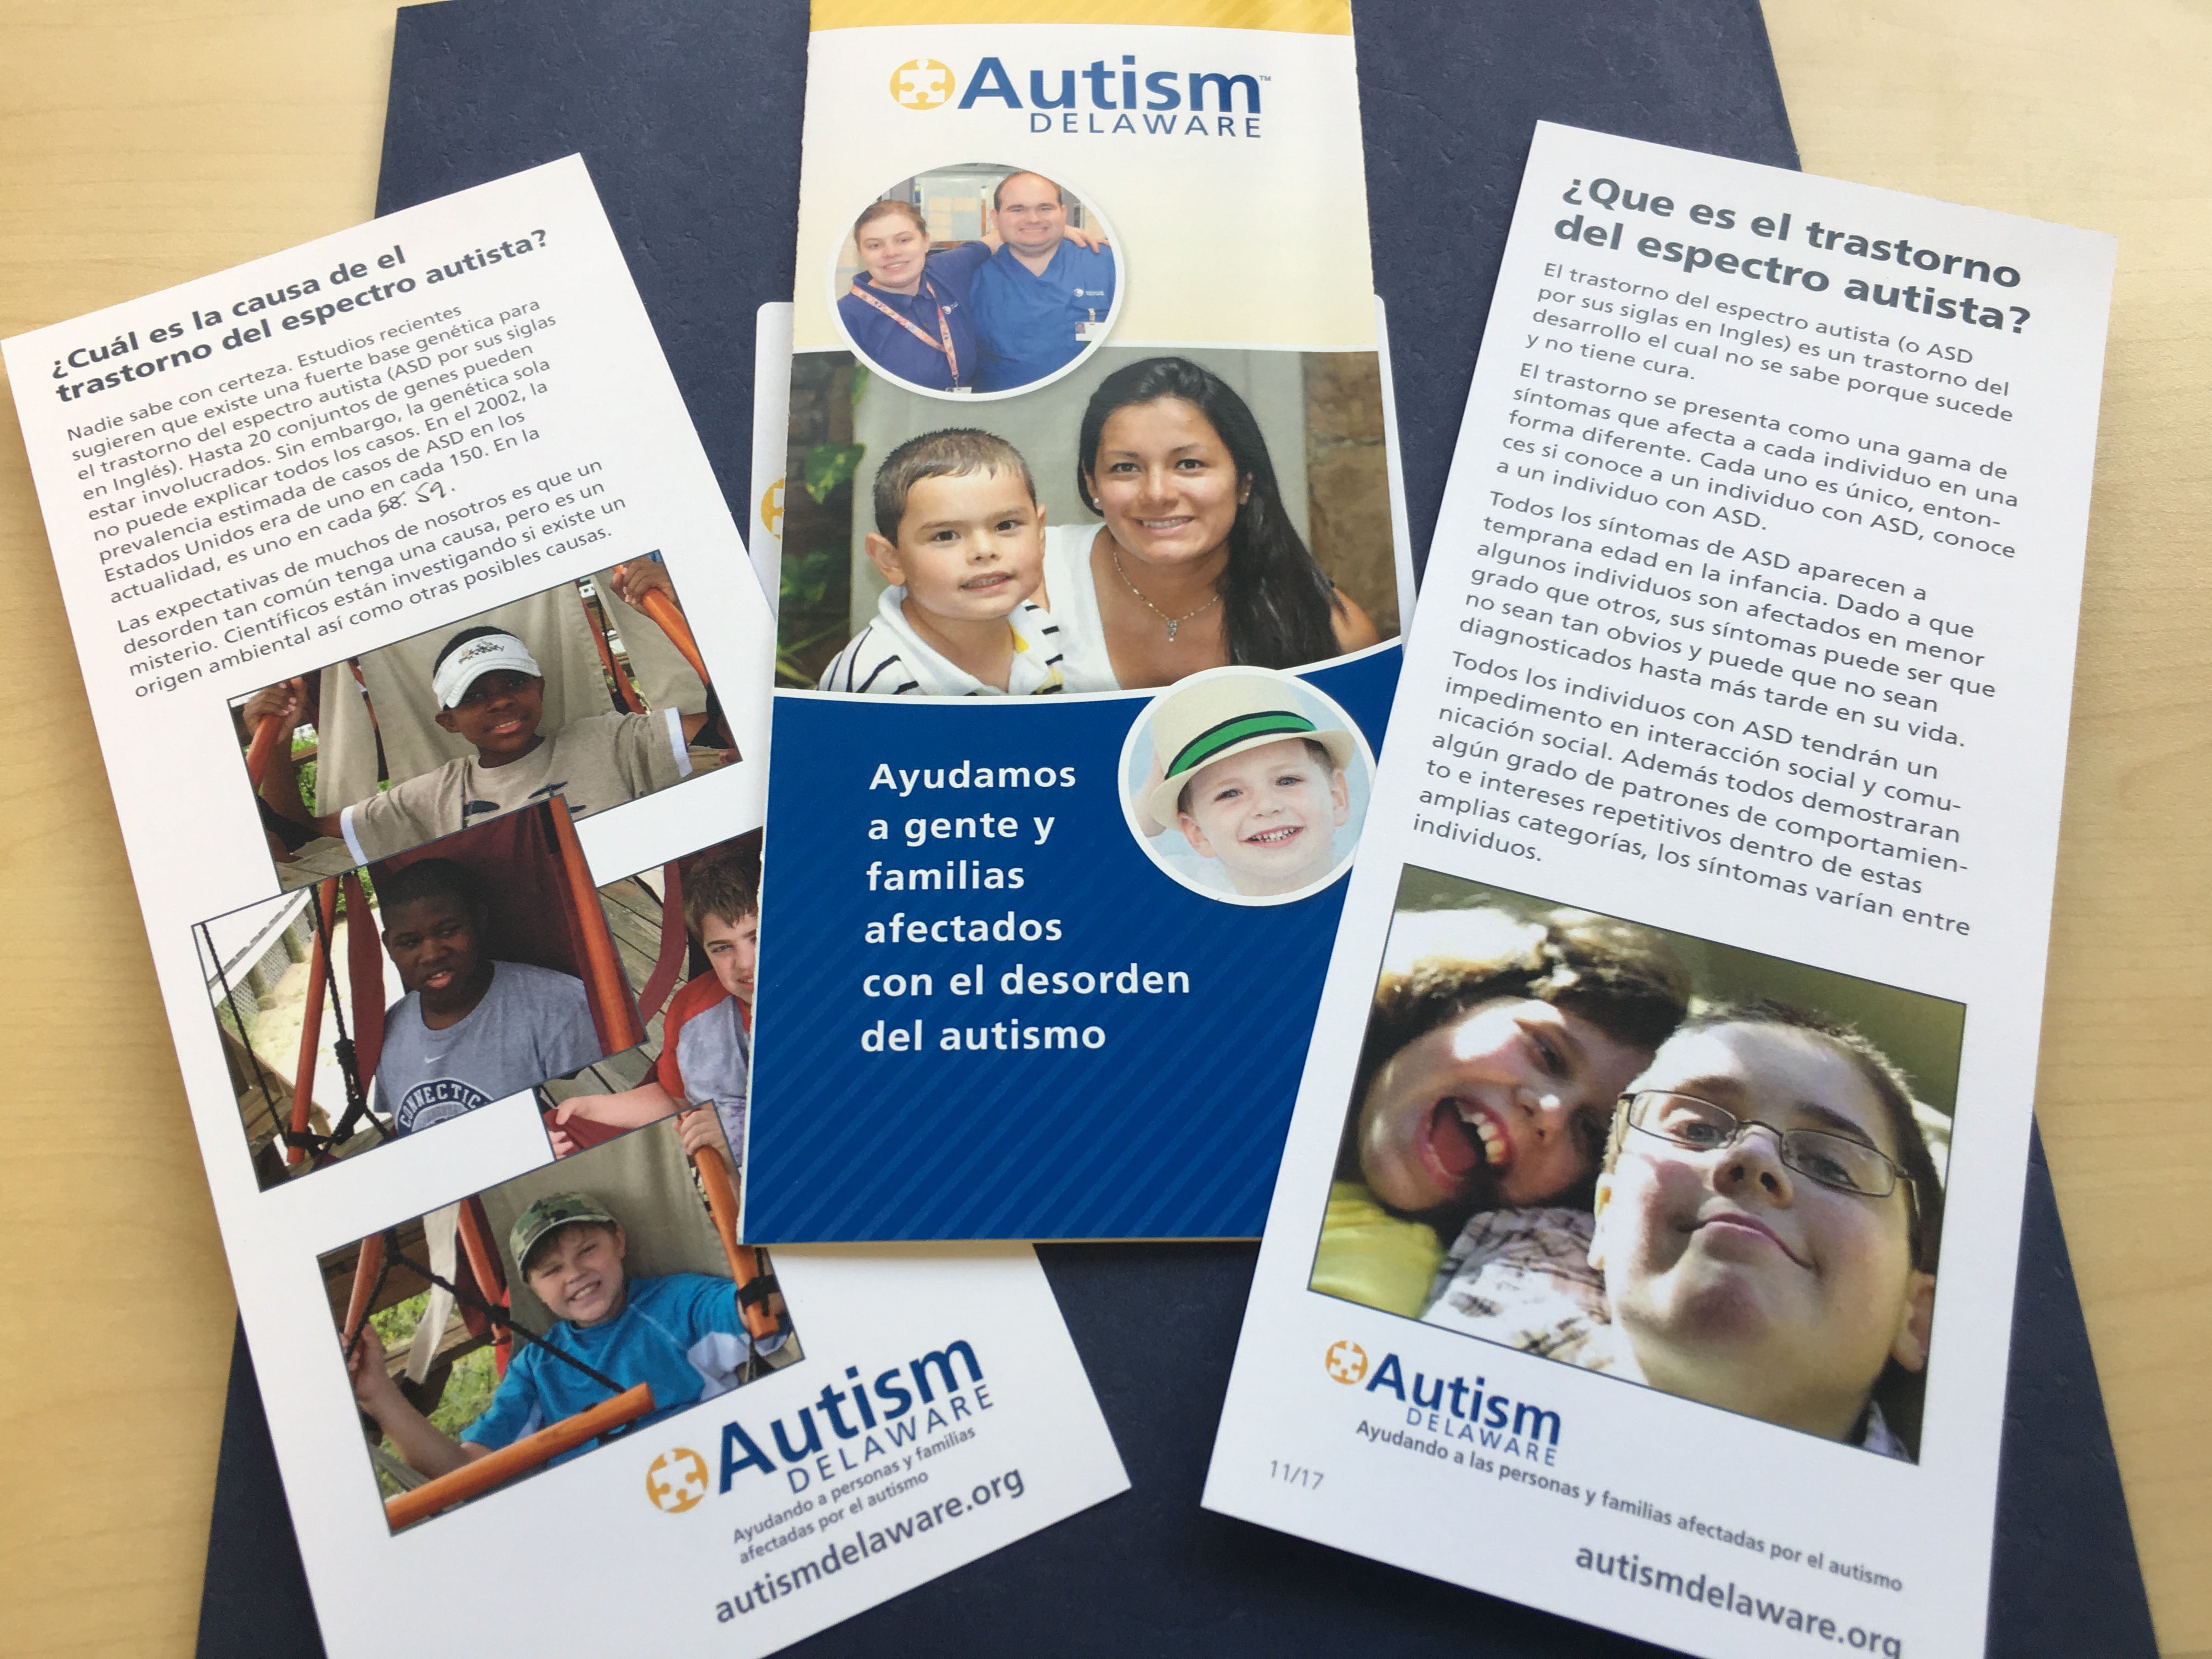 Spanish language pamphlets produced by Autism Delaware are part of the group’s effort to better connect Latino families to services they need. (Mark Eichmann/WHYY)